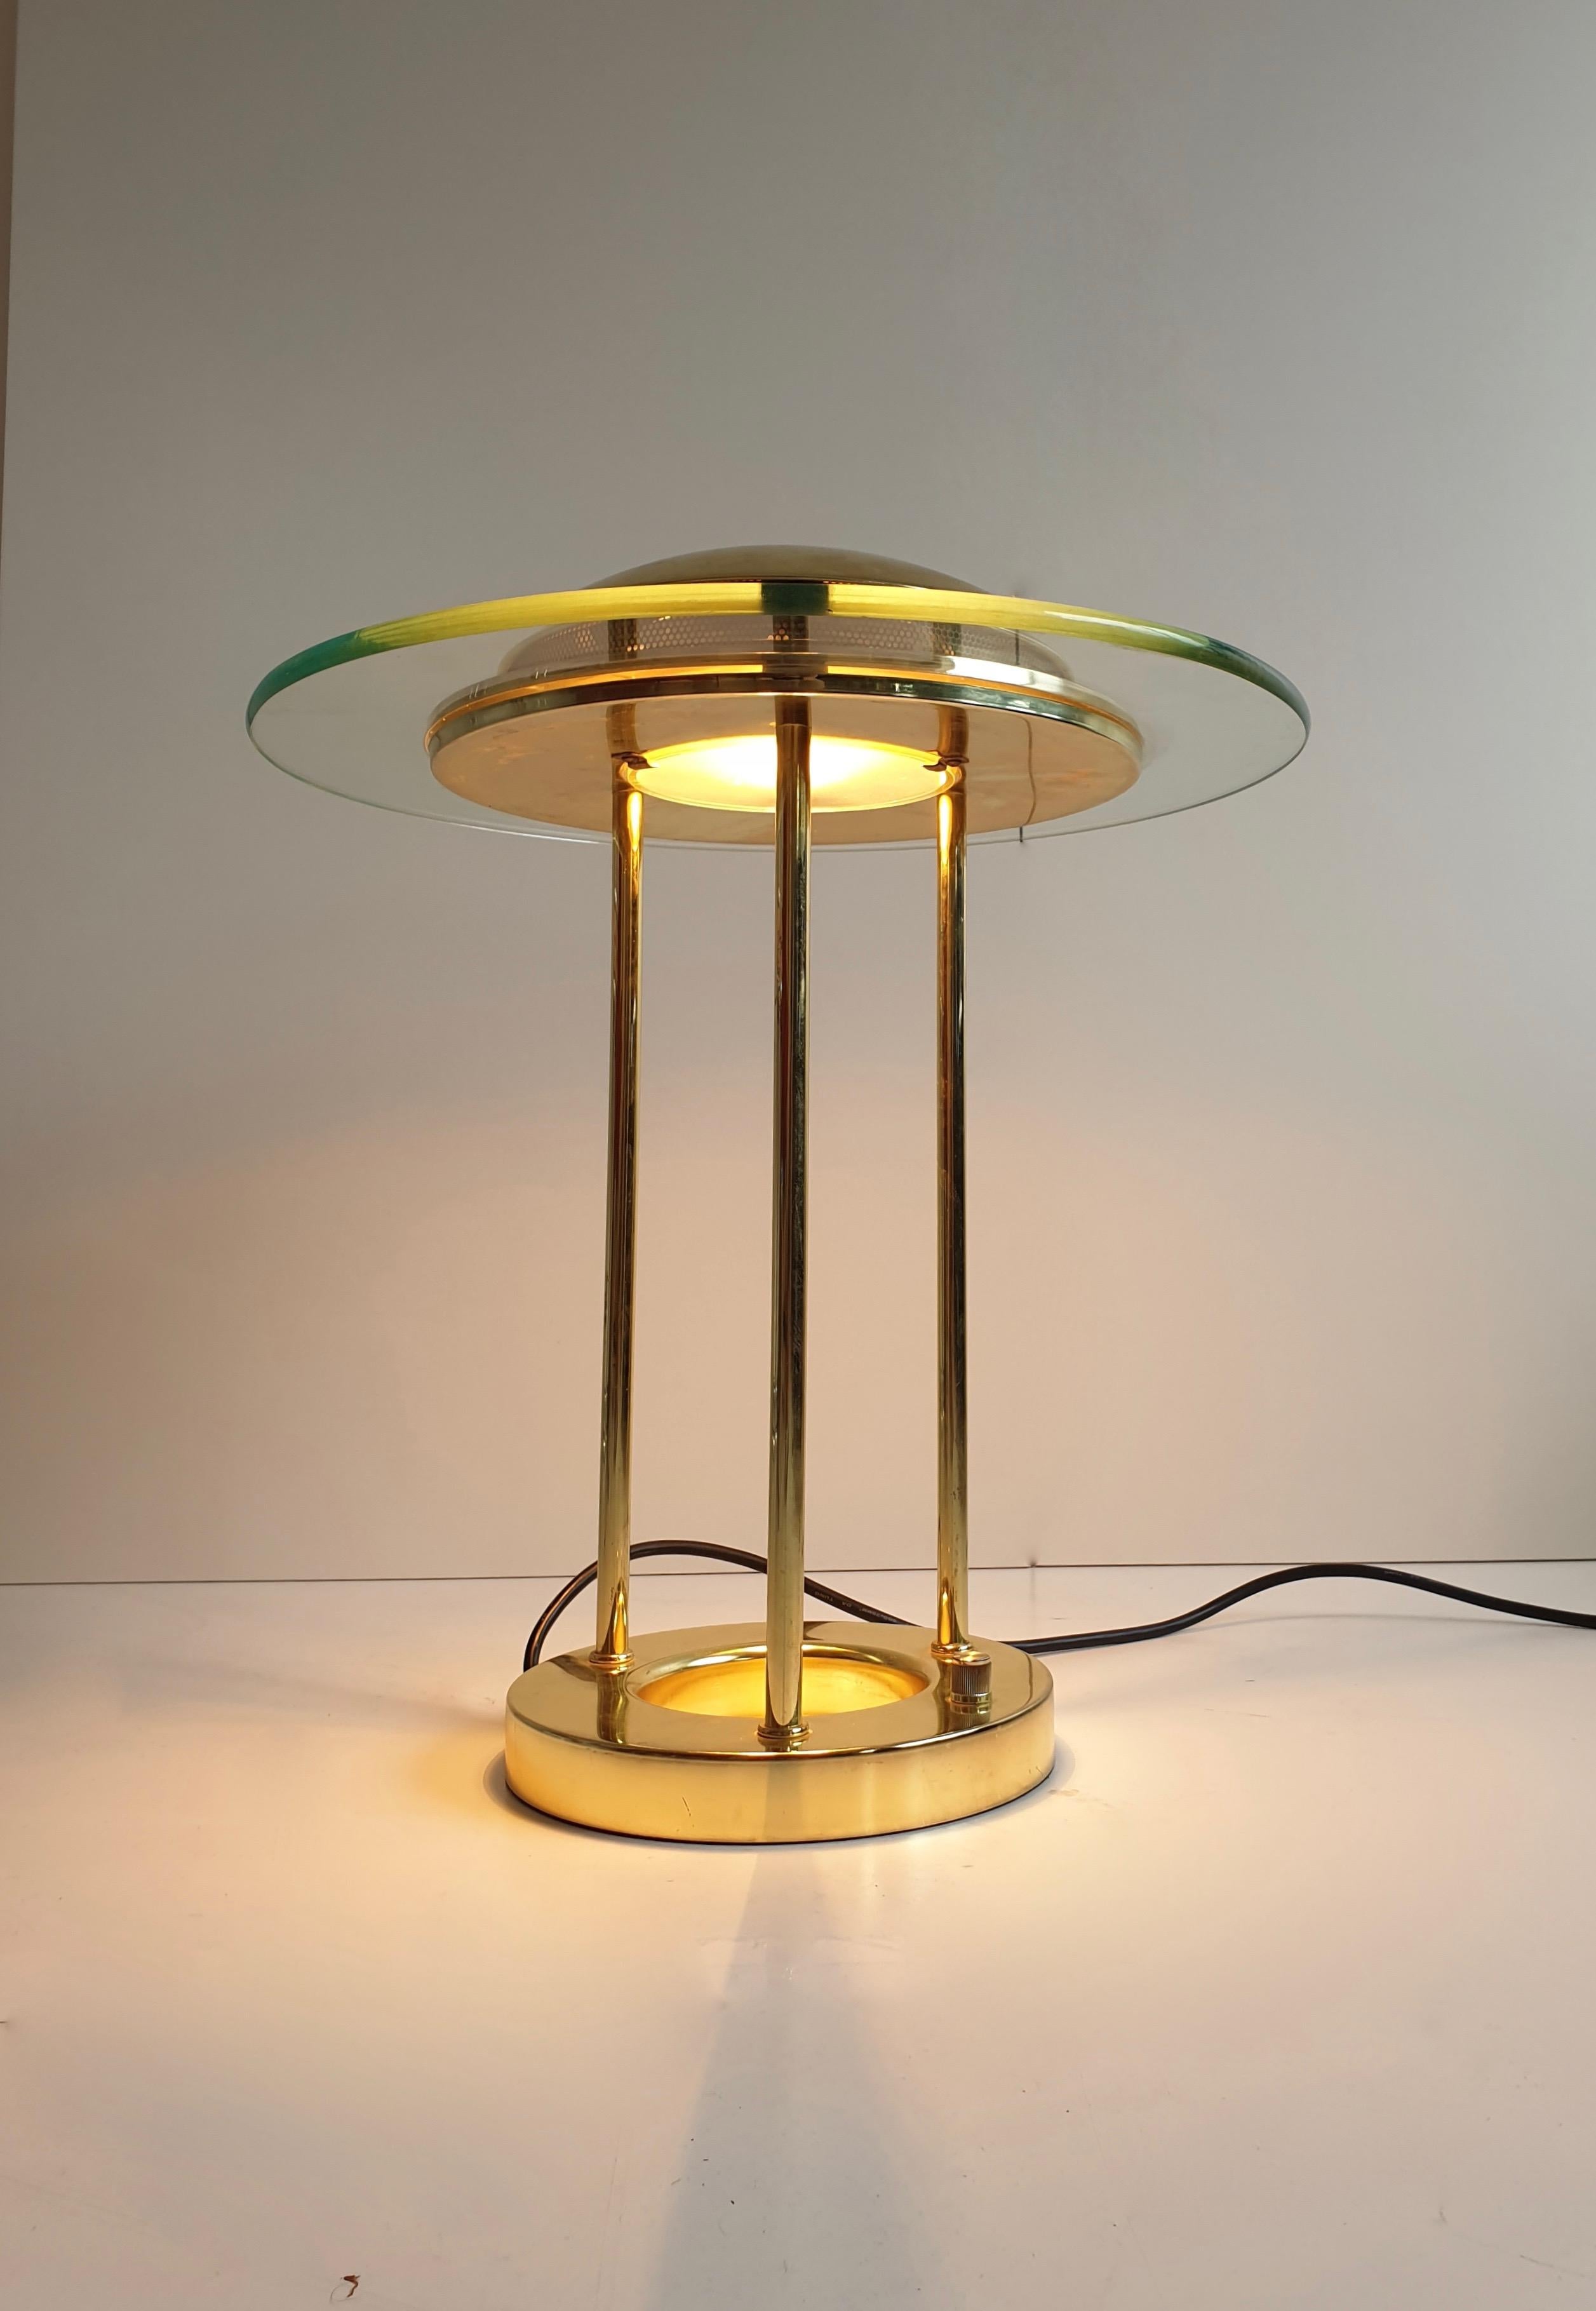 Vintage brass 'Saturn' lamp by Robert Sonneman for George Novak. Inspired by Saturn, it features a glass ring around its round dome shade, resting on three straight brass rods on a polished zinc base. The light level is adjustable via a brass rotary